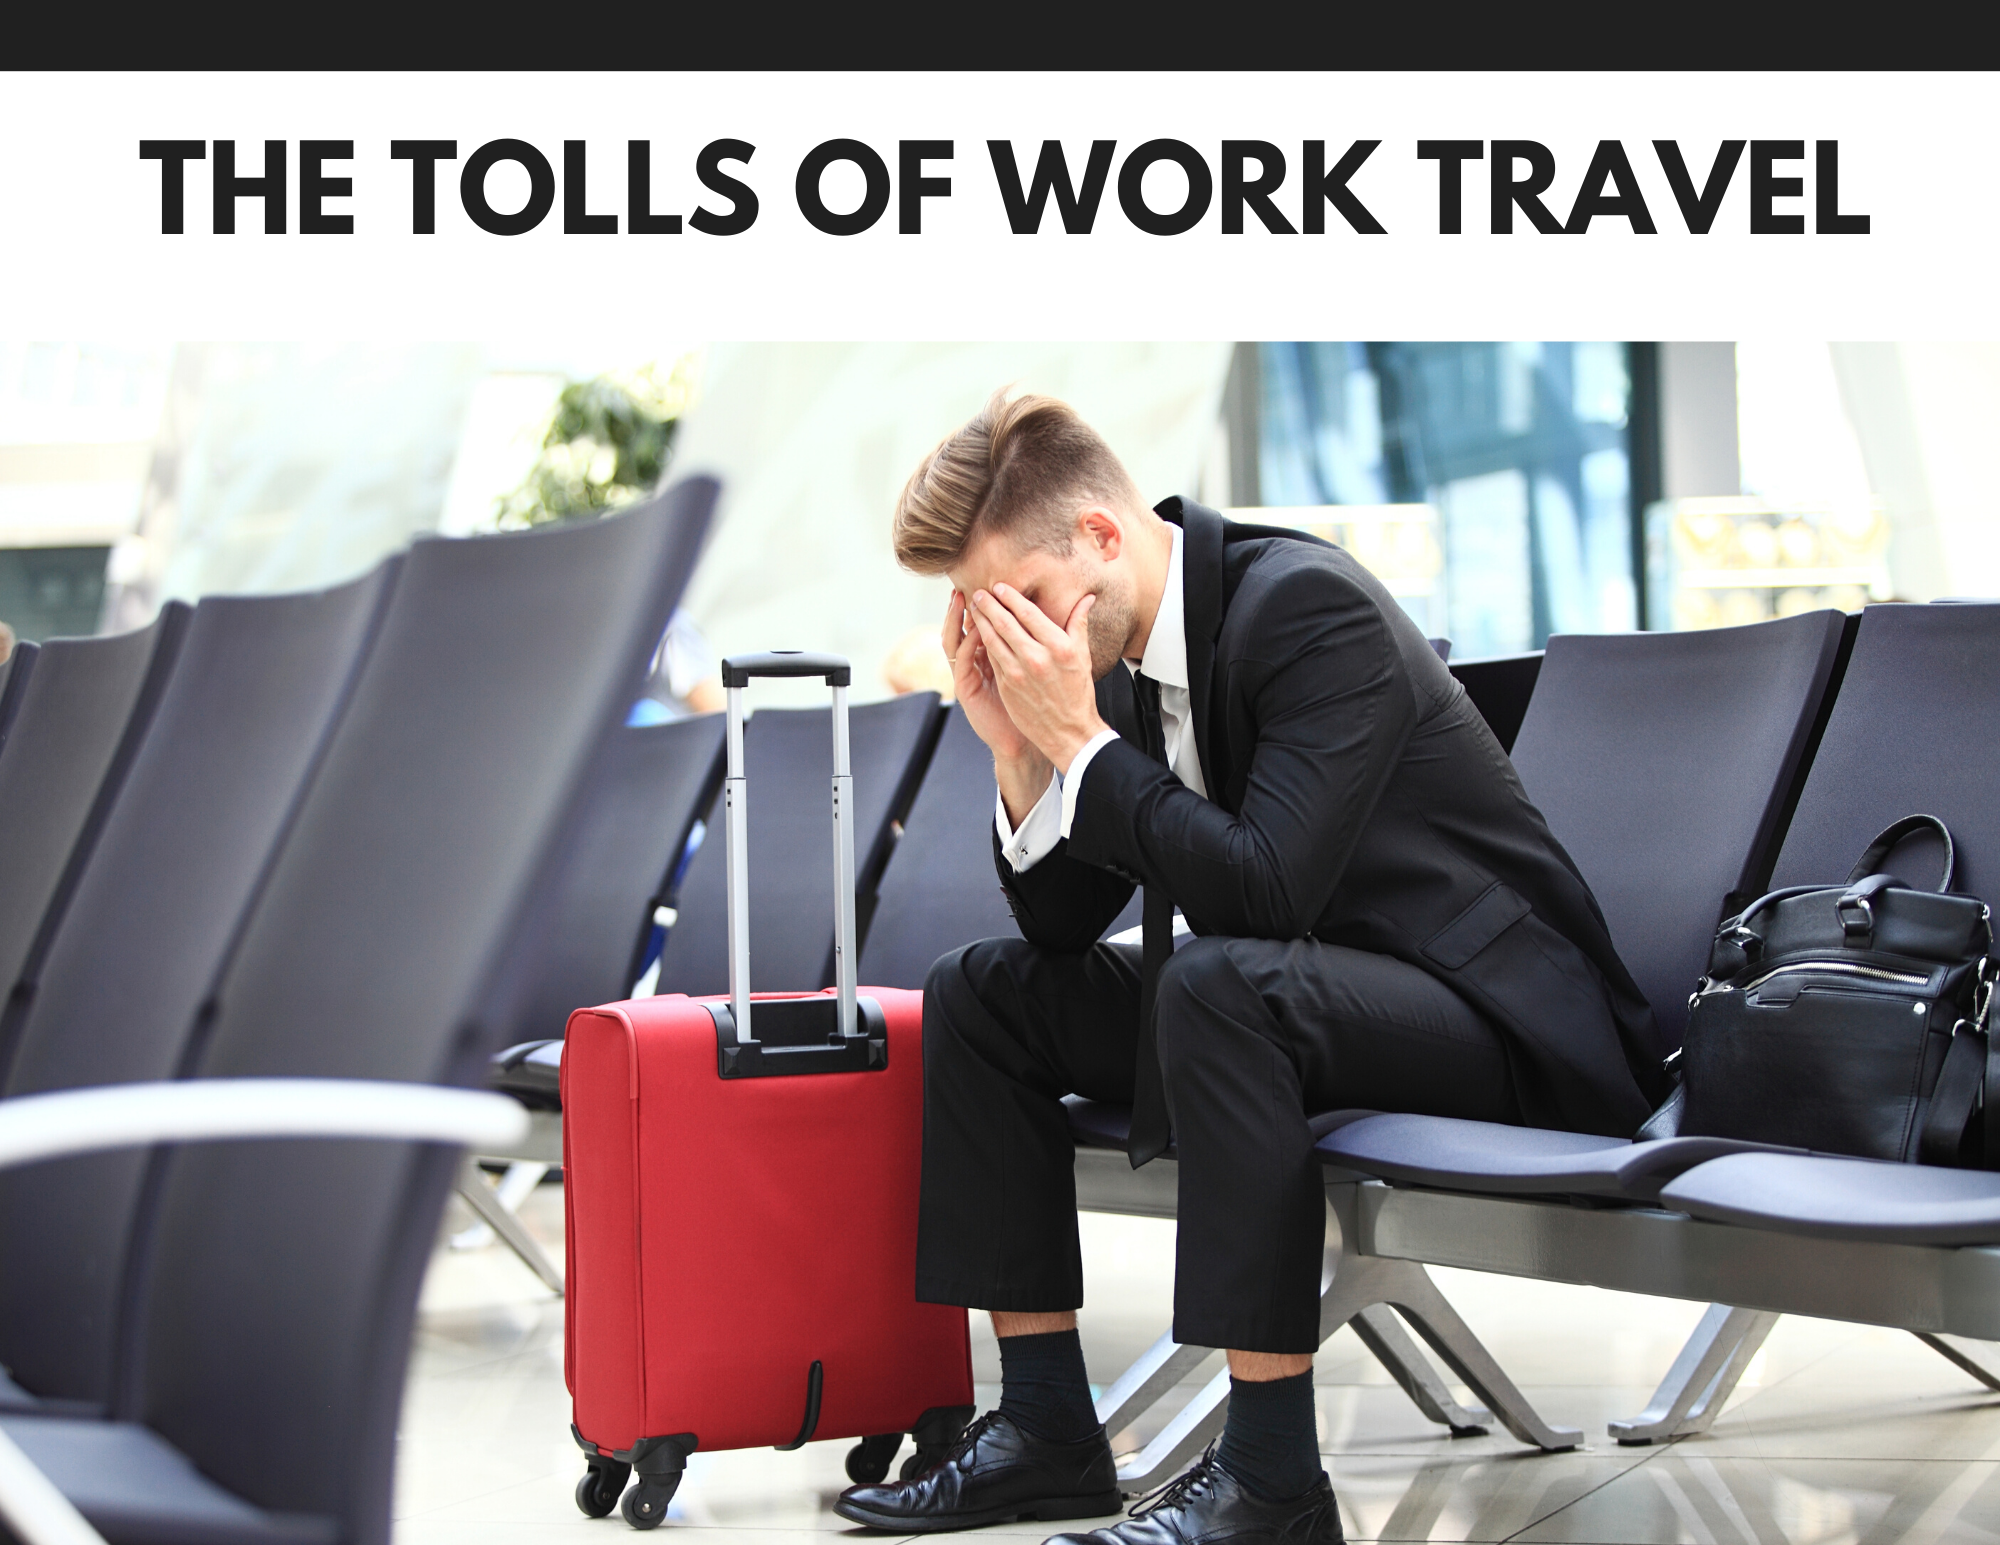 how to work travel time